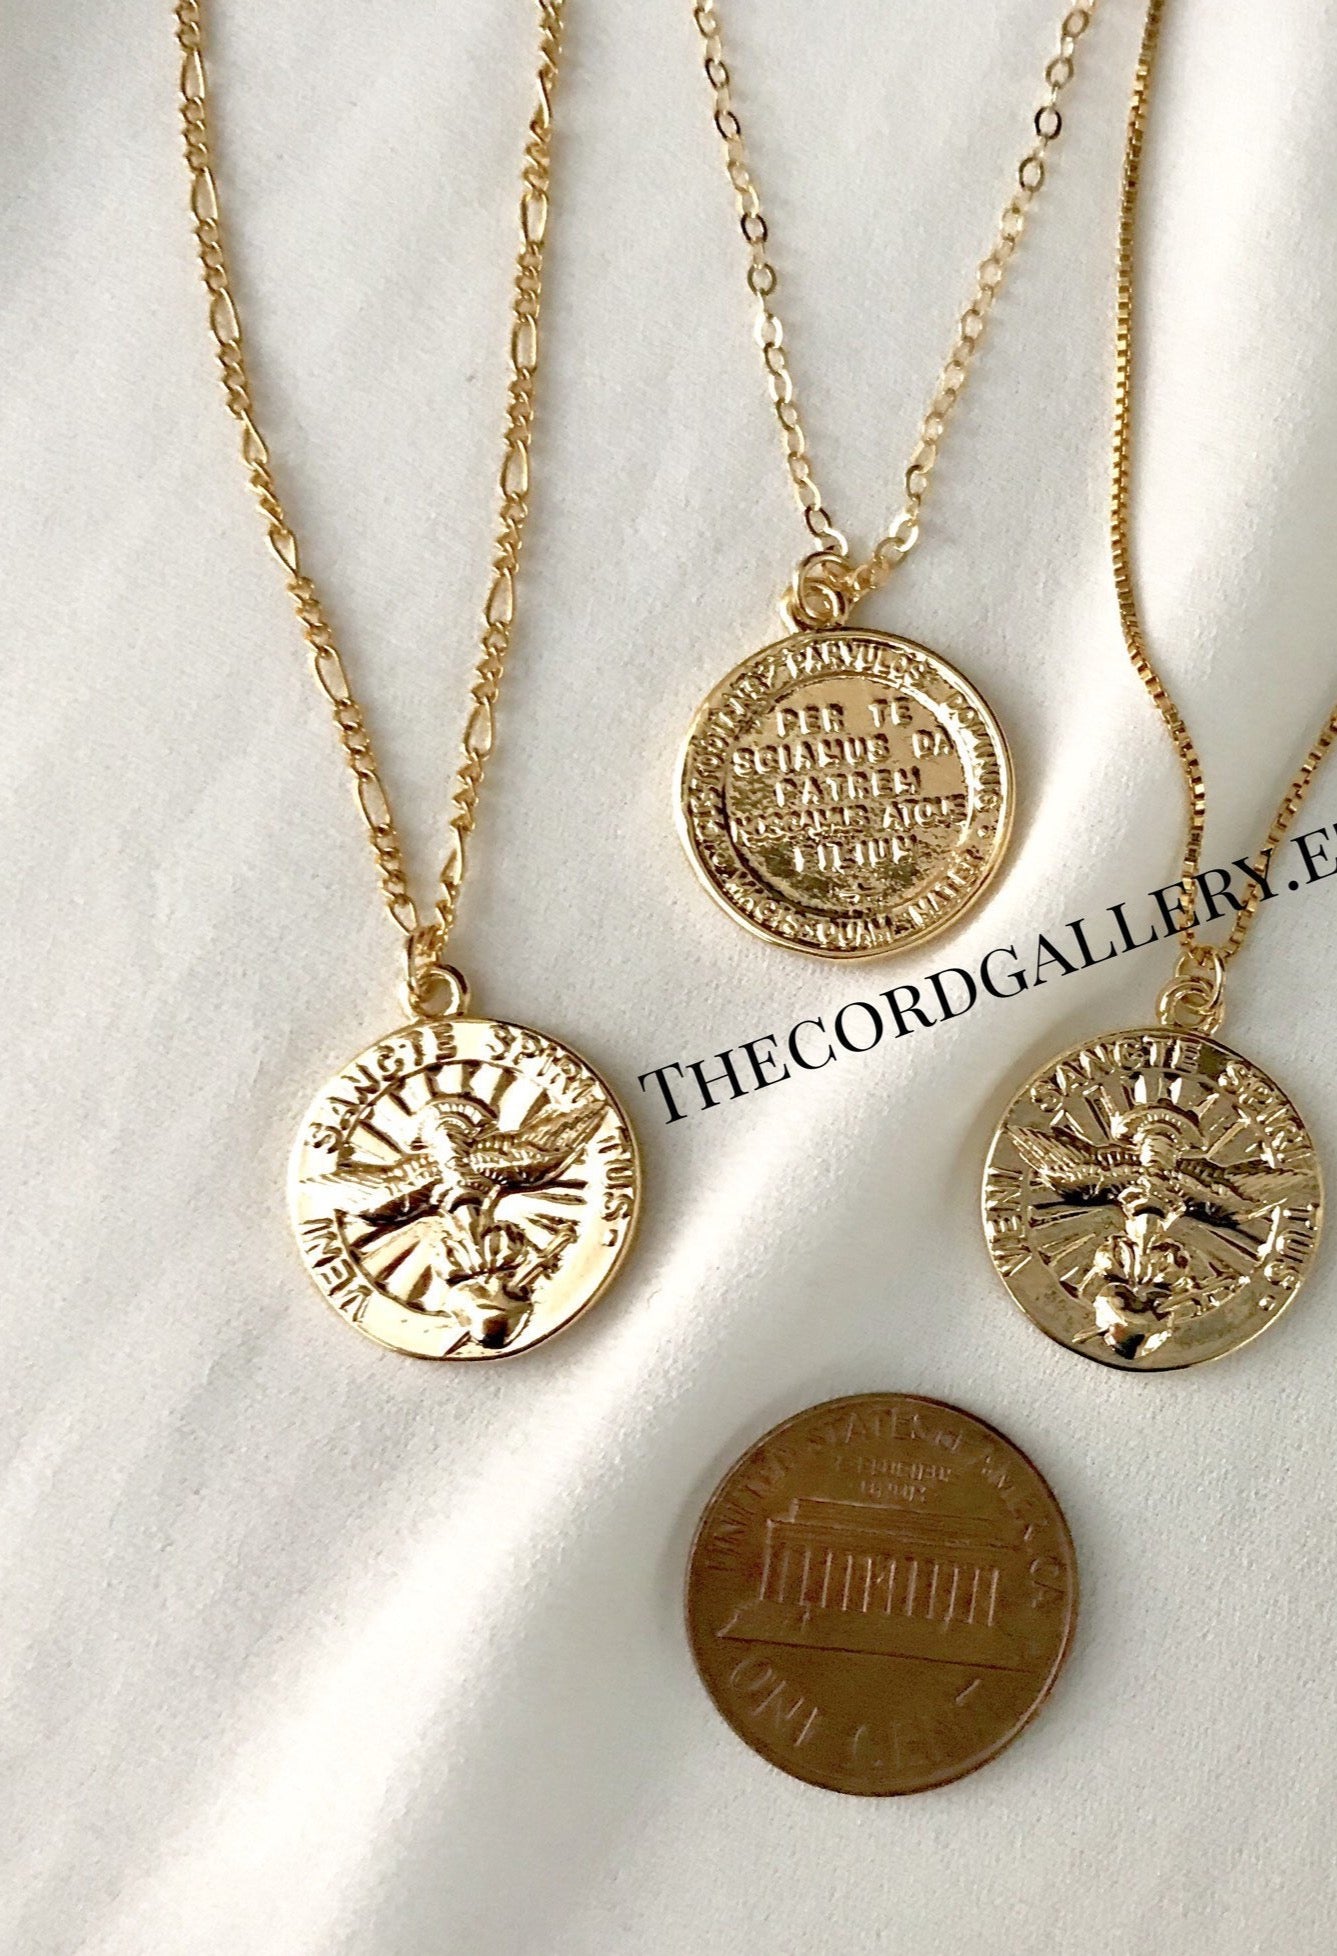 Gold Sacred Heart Medallion Necklace - Gold Filled – The Cord Gallery